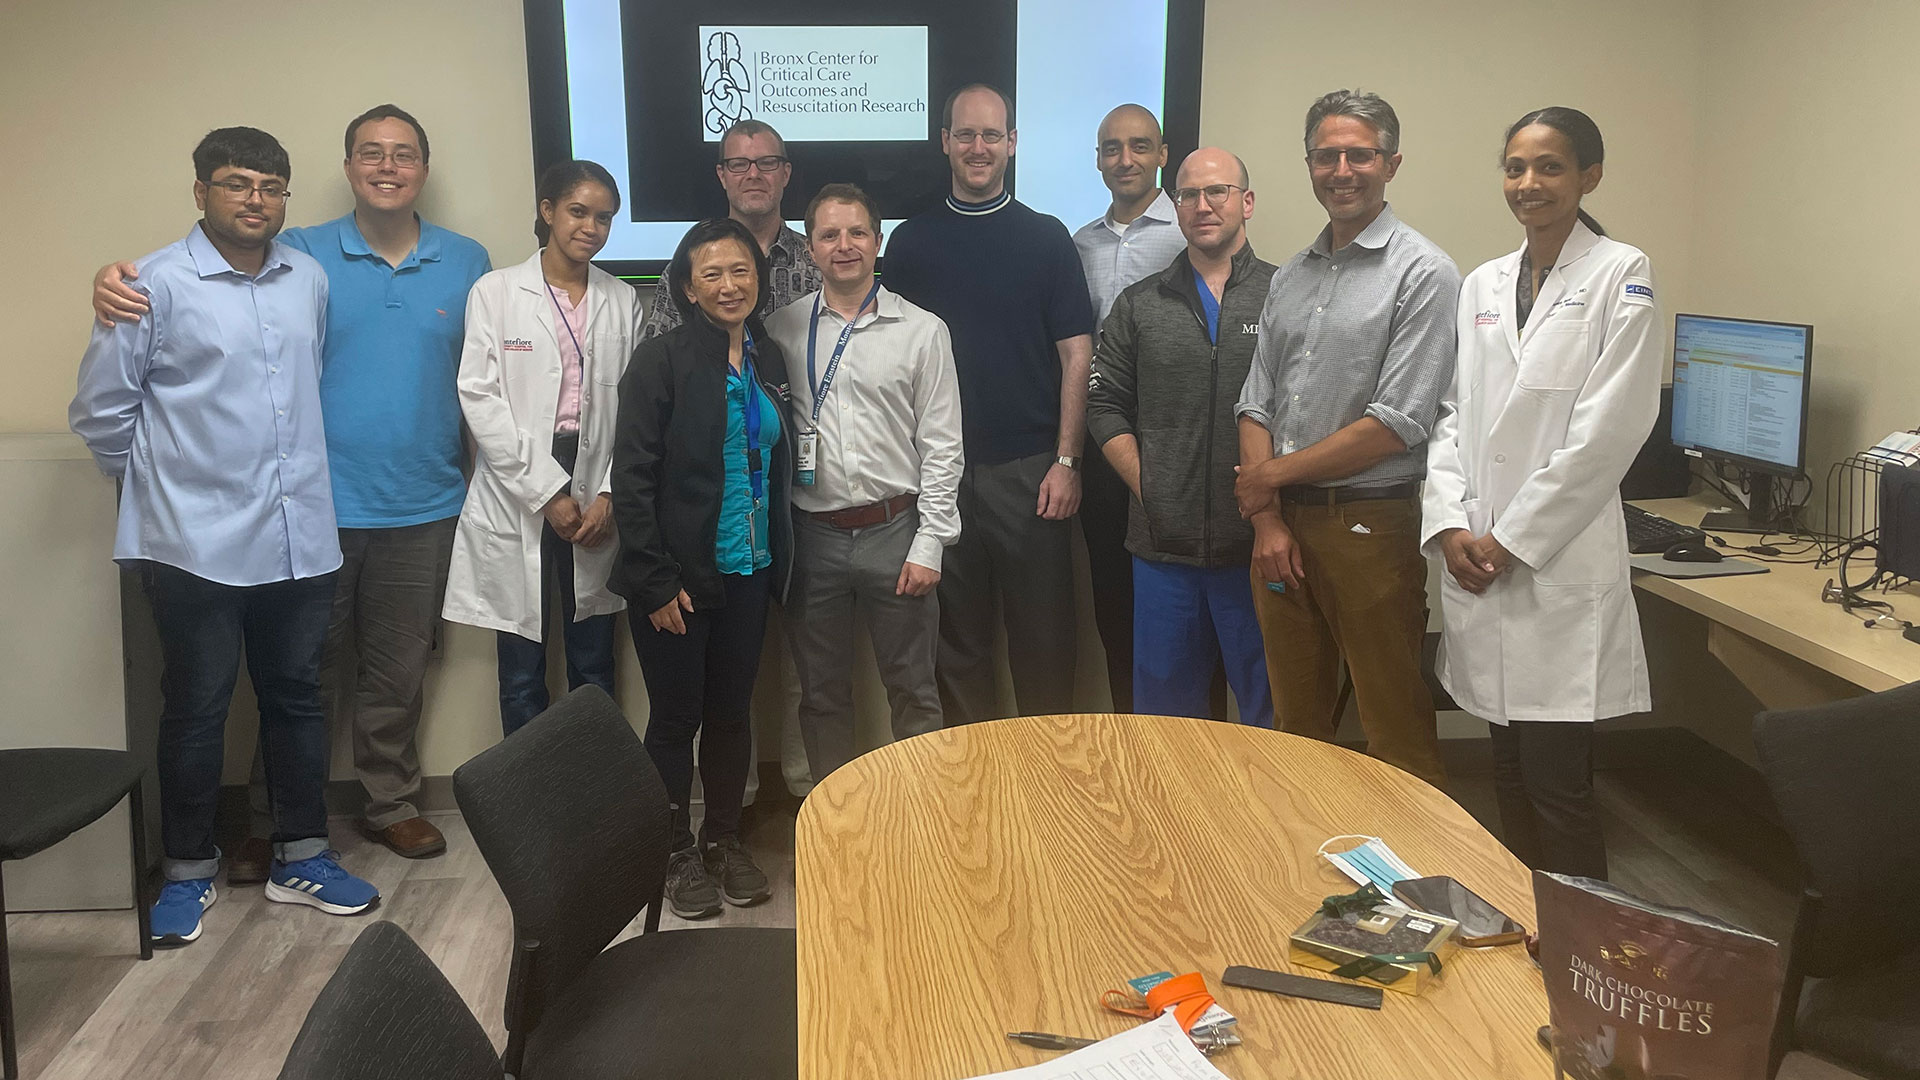 Bringing Critical Care Research to Patients in the Bronx